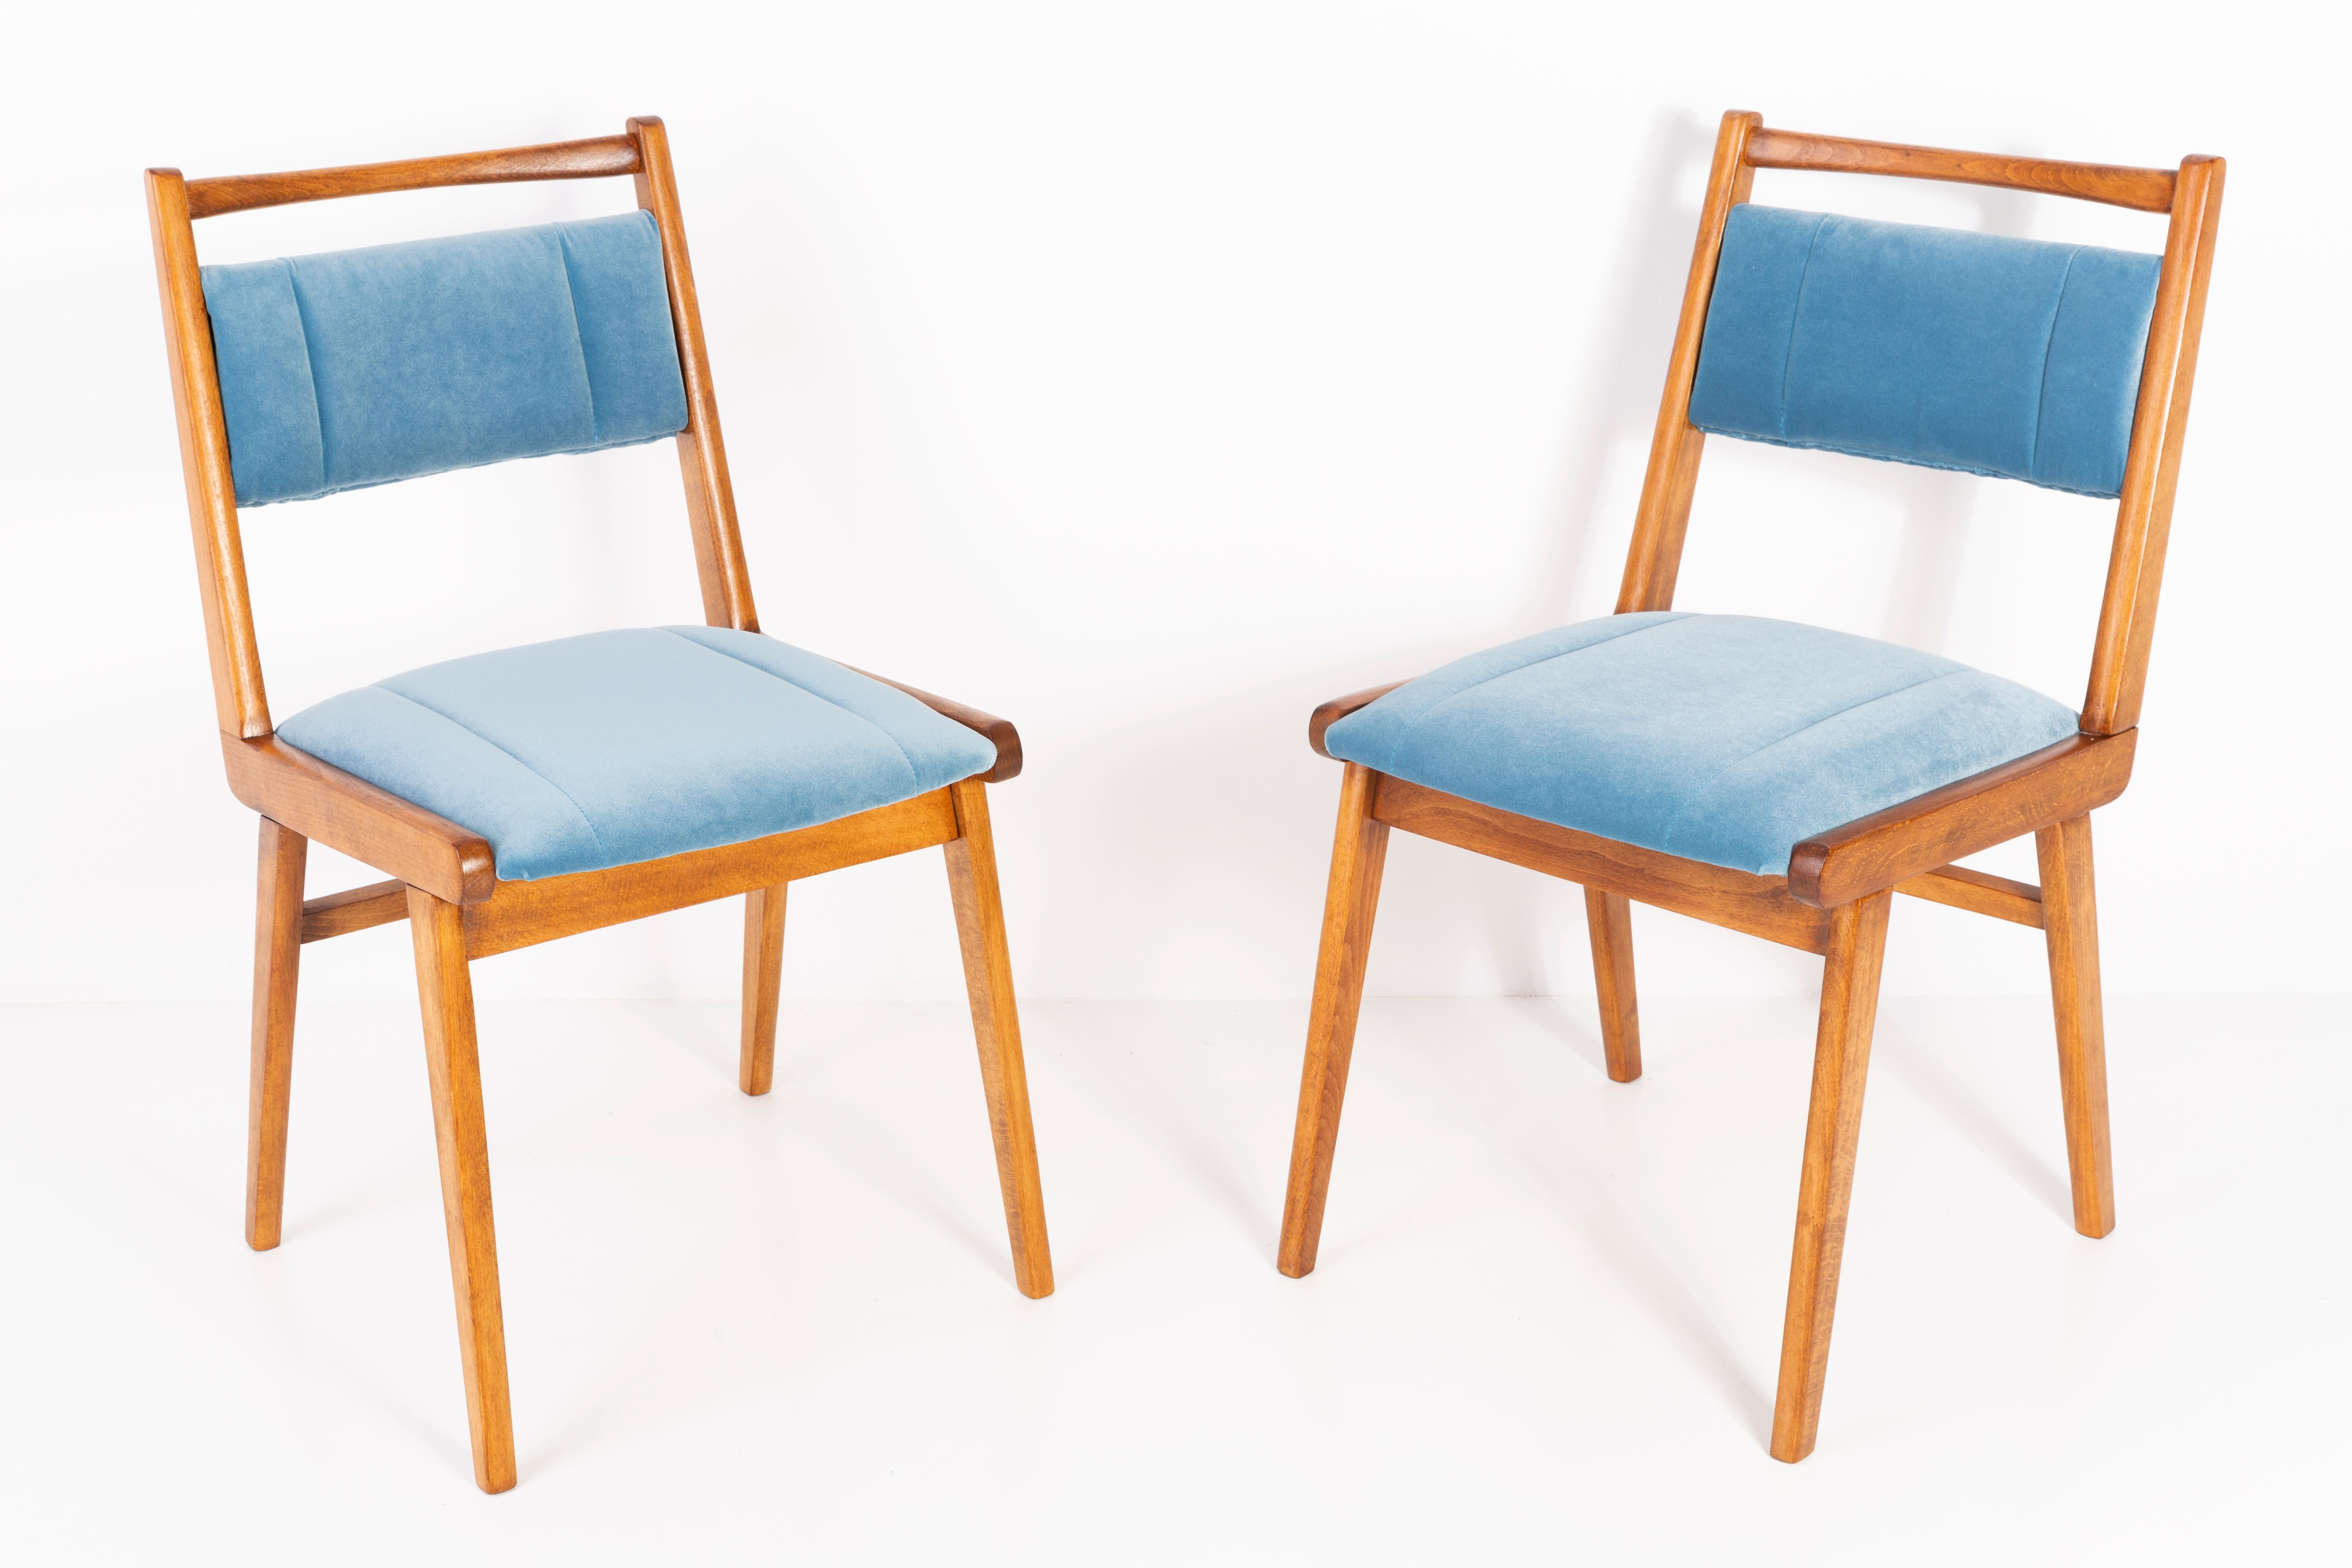 Chairs designed by Prof. Rajmund Halas. It is jar type model. Made of beechwood. Chairs are after a complete upholstery renovation, the woodwork has been refreshed. Seat and back is dressed in a blue (number 31), durable and pleasant to the touch